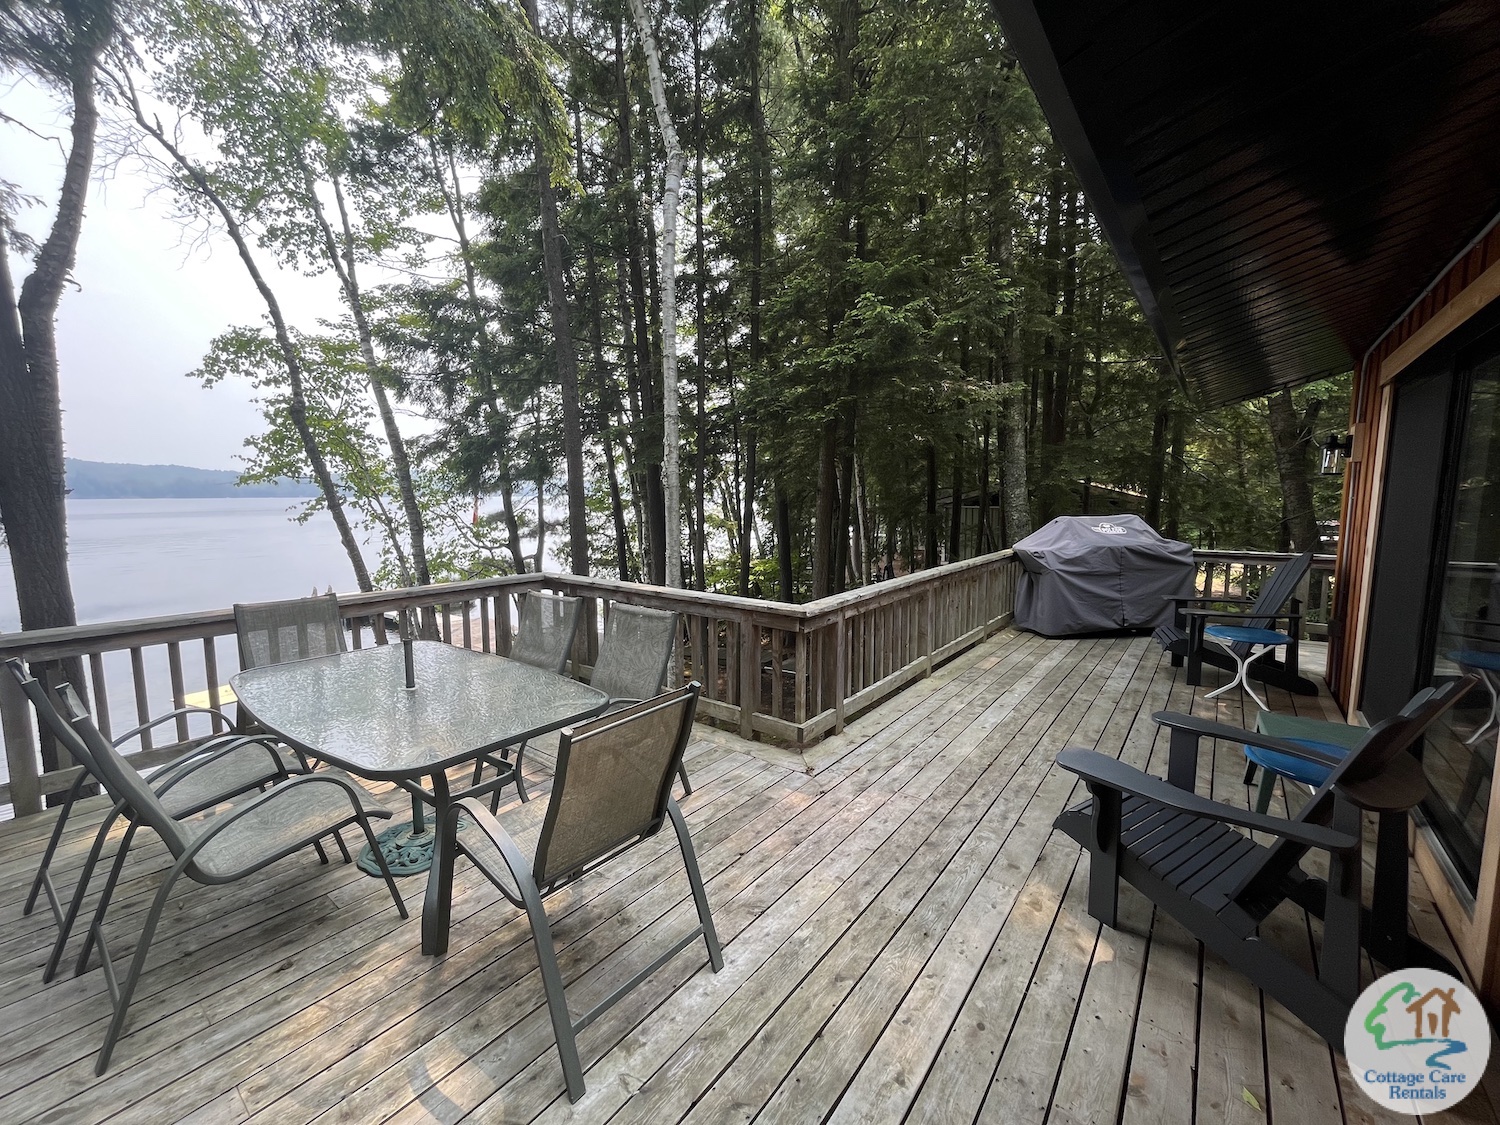 Kennisis Lake Pine Point Bay - Deck and Outdoor Dining